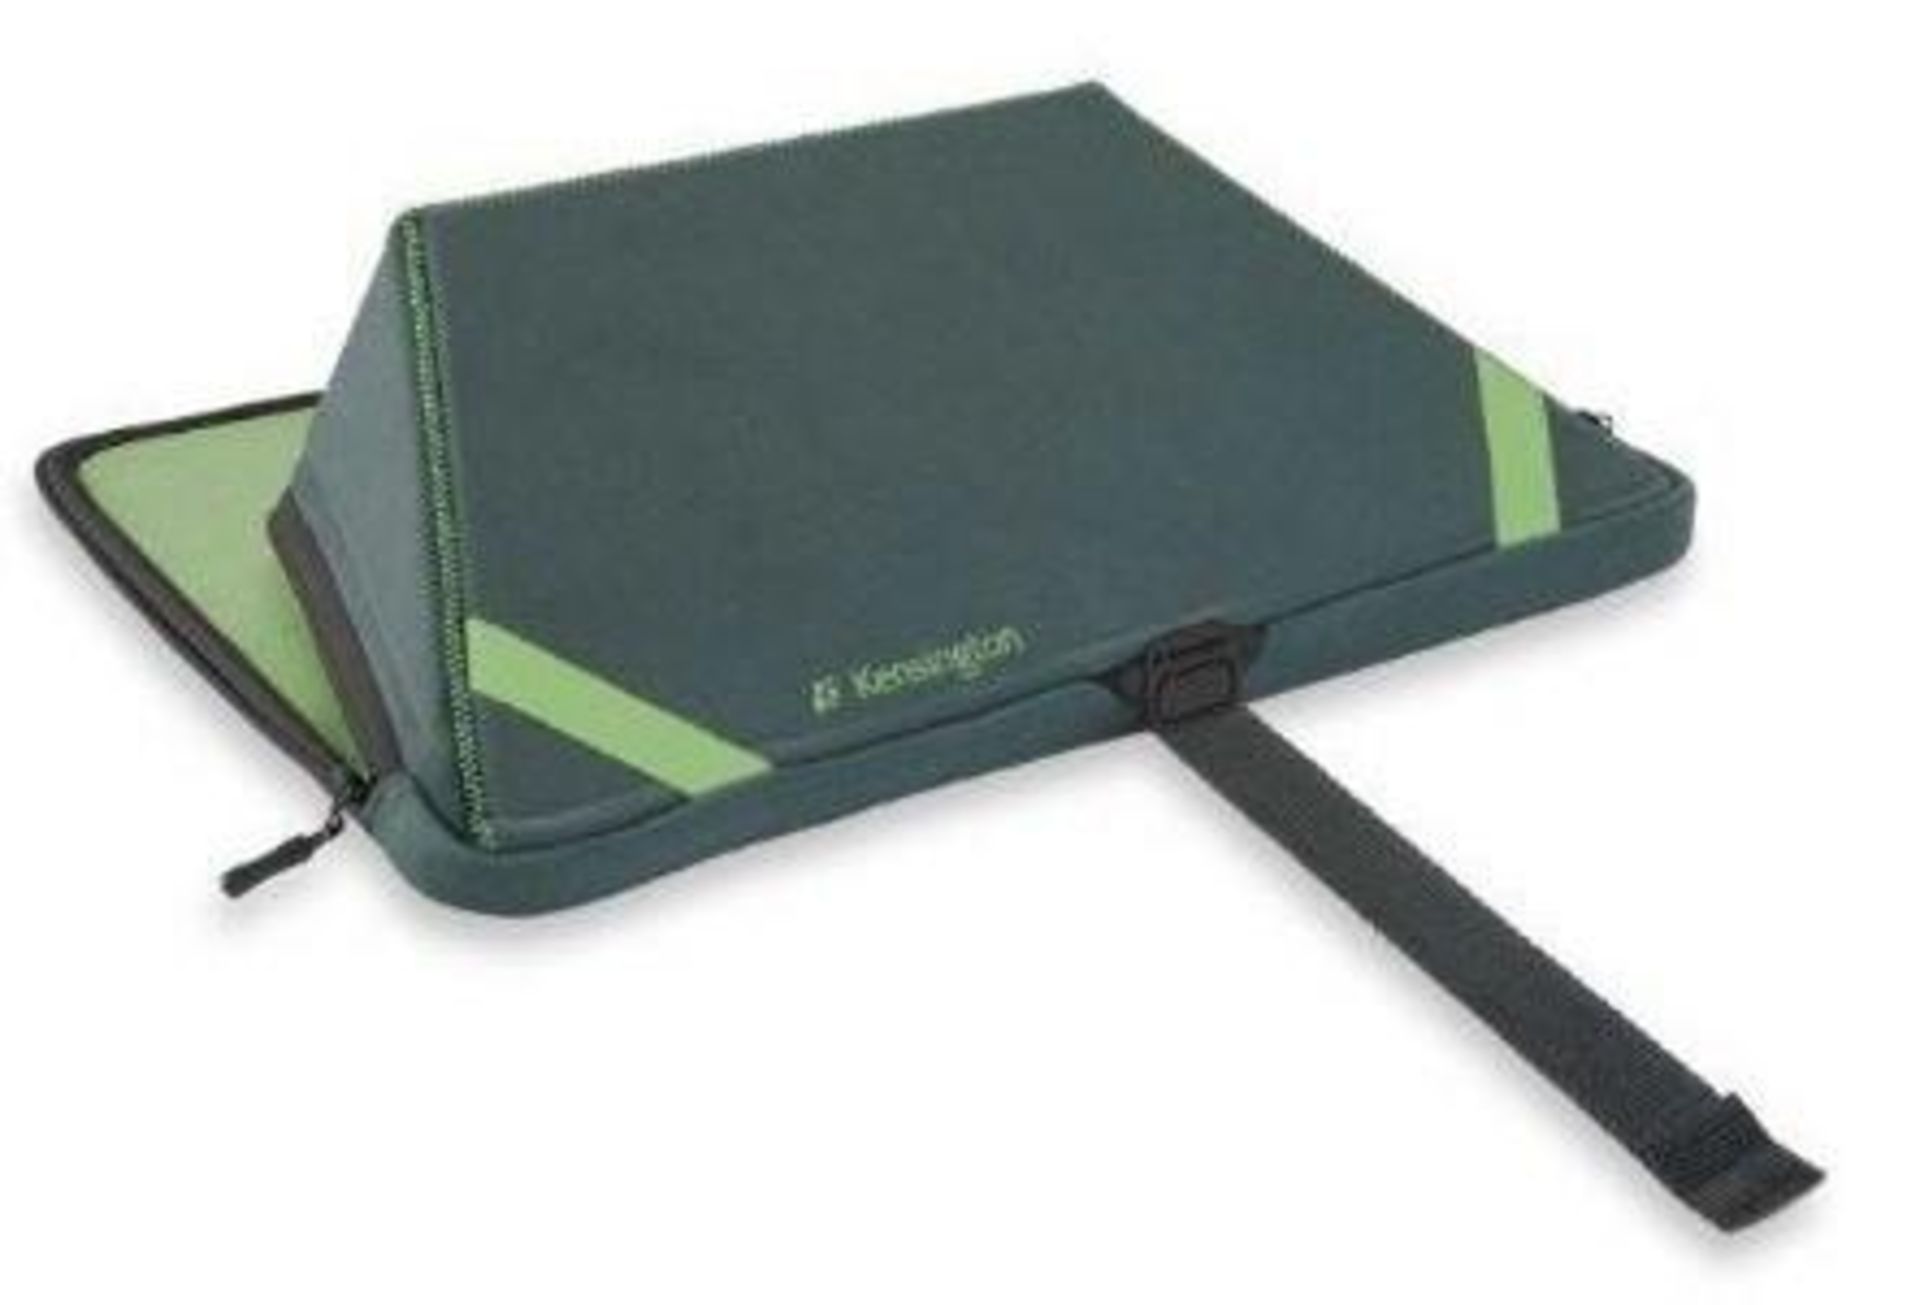 4 x Kensington TwoFold Laptop Stand Cases - Suitable For Laptops Upto 15.4" - Stylish Laptop Sleeve